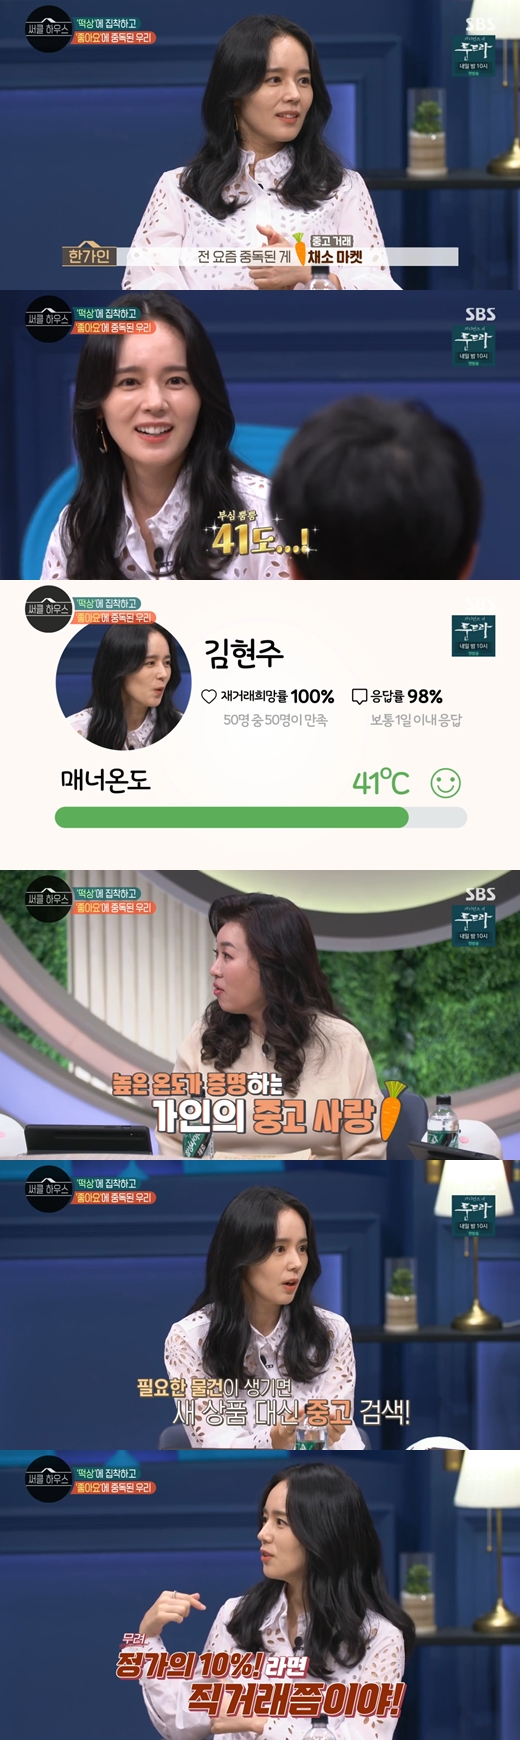 Actor Han Ga-in confesses used deal AddictedSBS circle house broadcasted on the 24th was decorated with the theme of We are obsessed with rice cake and Addicted to Like.When the theme Addicted was given on the day, Han Ga-in said, I am Addicted to the carrot market. The temperature has risen to 41 degrees.Han Ga-in said, Now if you need something, you will go into the carrot market first, not the portal site. I also go out with the deal.I did not go out once or twice, it is about 41 degrees. 